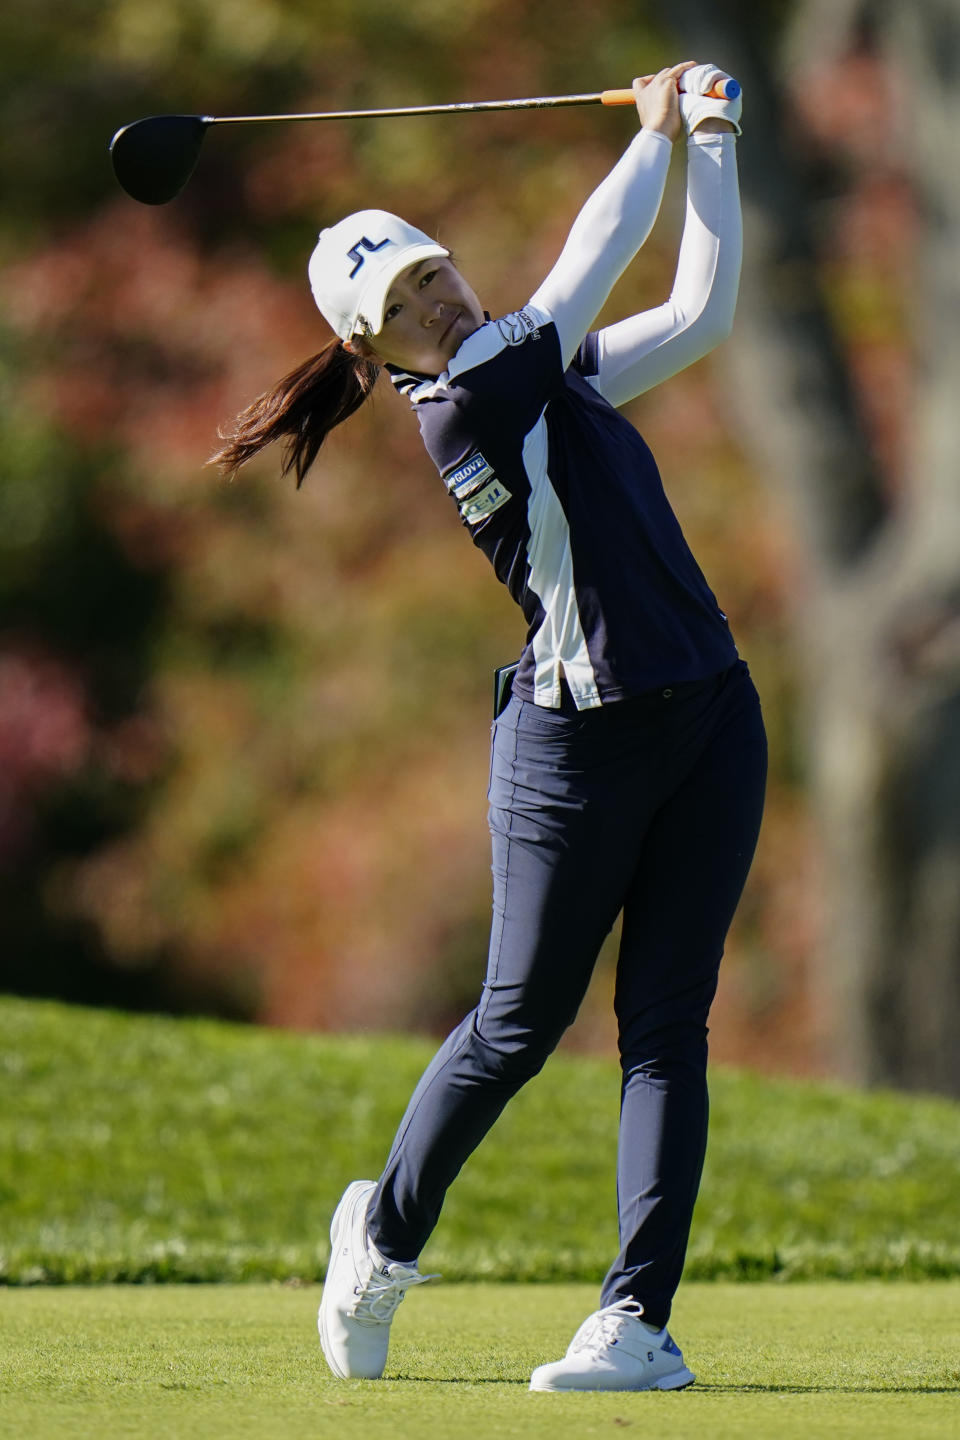 Kelly Tan, of Malaysia, hits her tee shot on the second hole during the first round of the KPMG Women's PGA Championship golf tournament at the Aronimink Golf Club, Thursday, Oct. 8, 2020, in Newtown Square, Pa. (AP Photo/Matt Slocum)